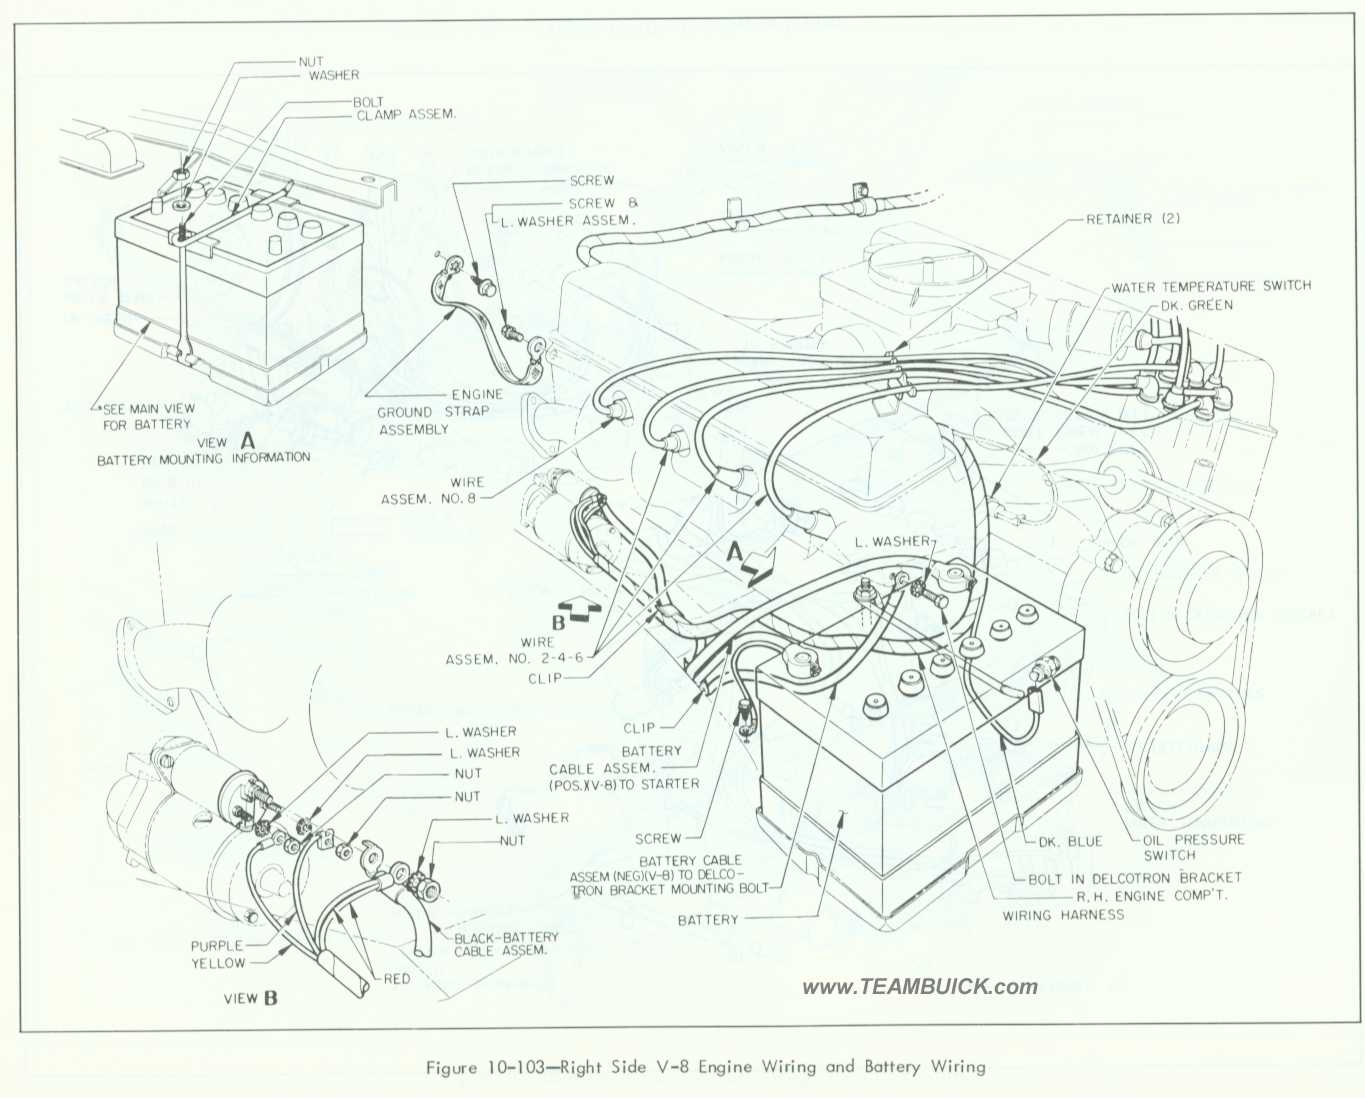 1964 Buick Right Side Engine and Transmission Wiring